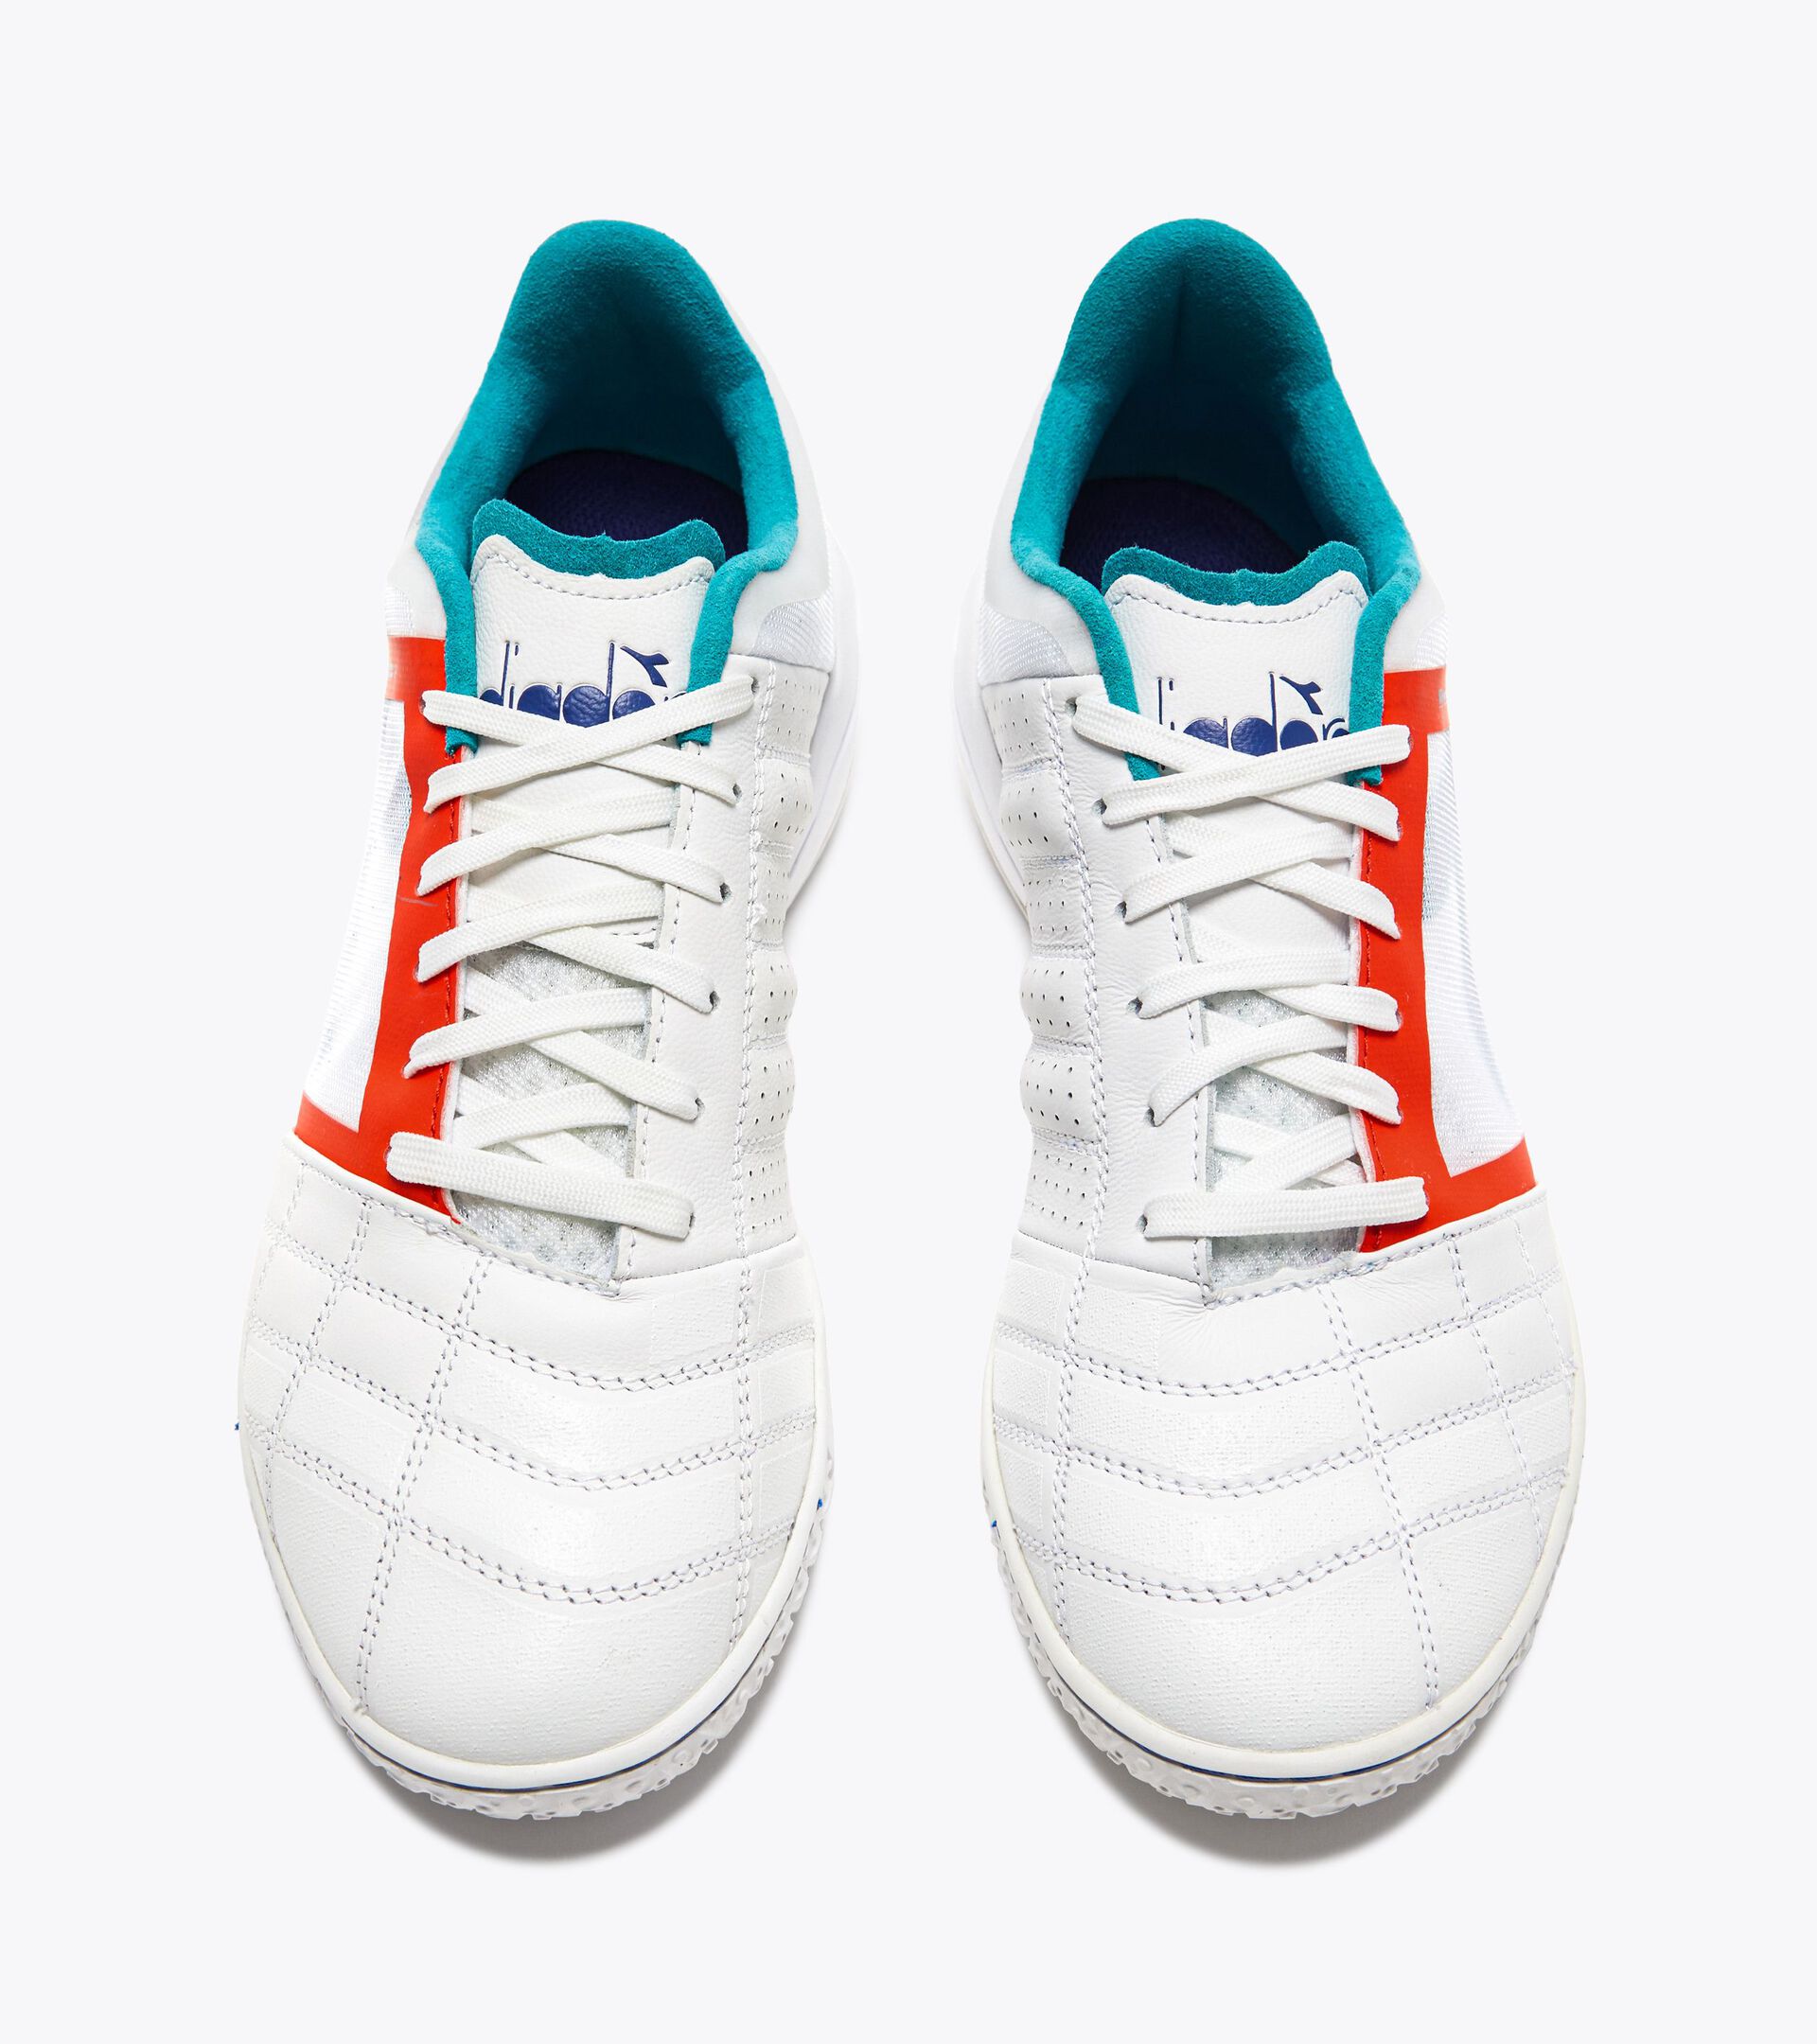 Futsal boots - Specific outsole for indoor grounds - Men BRASIL SALA CUP ID BLANCO/MAZARINO - Diadora